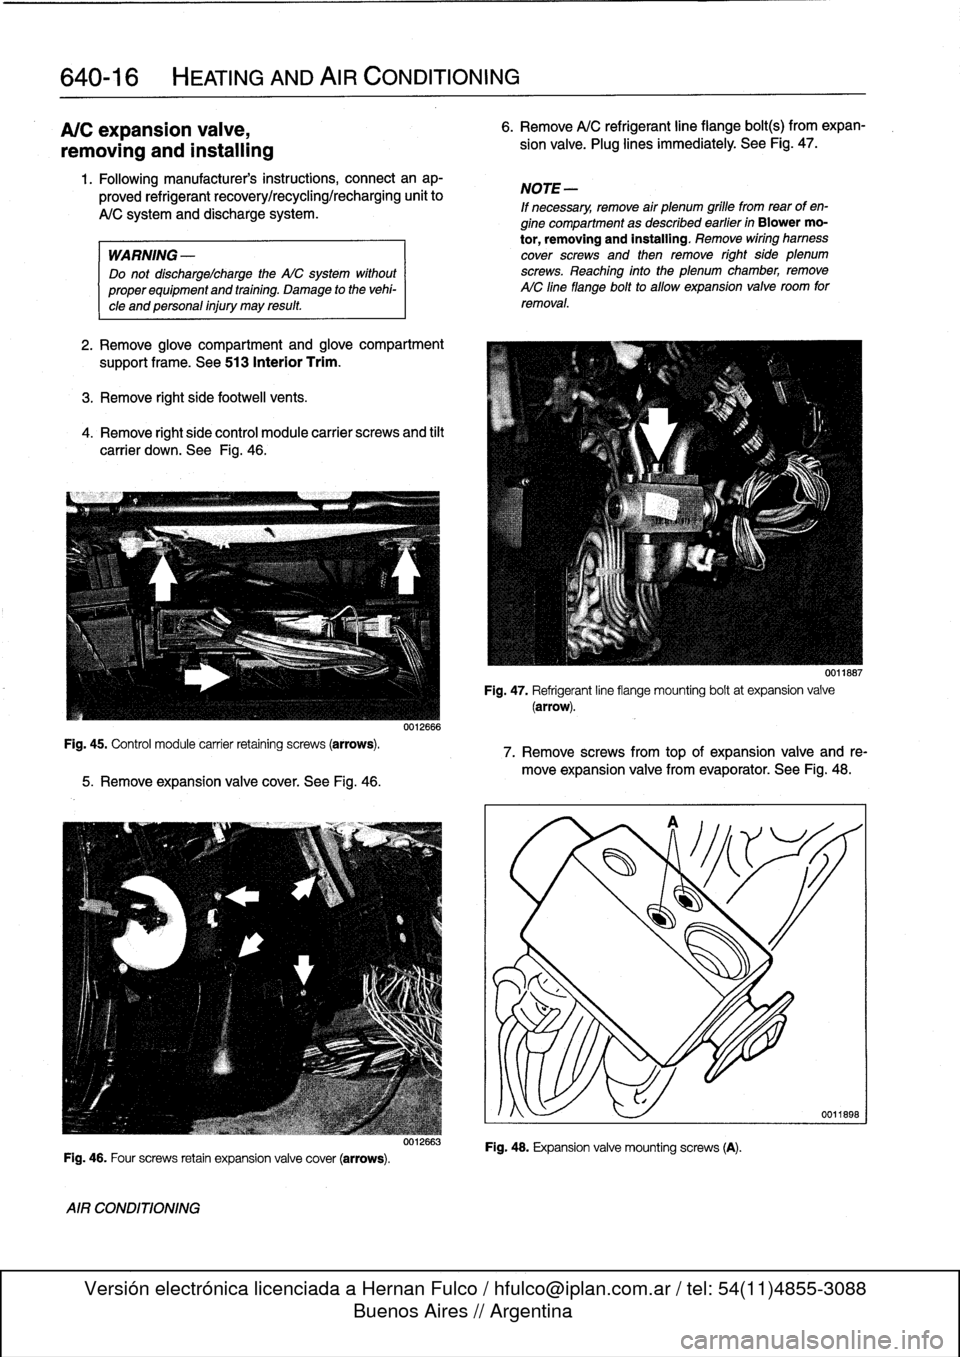 BMW 325i 1996 E36 Workshop Manual 
640-16

	

HEATING
AND
AIR
CONDITIONING

A/C
expansion
valve,

removing
and
installing

Fig
.
45
.
Control
module
carrier
retaining
screws
(arrows)
.

1
.
Following
manufacturers
instructions,
connec